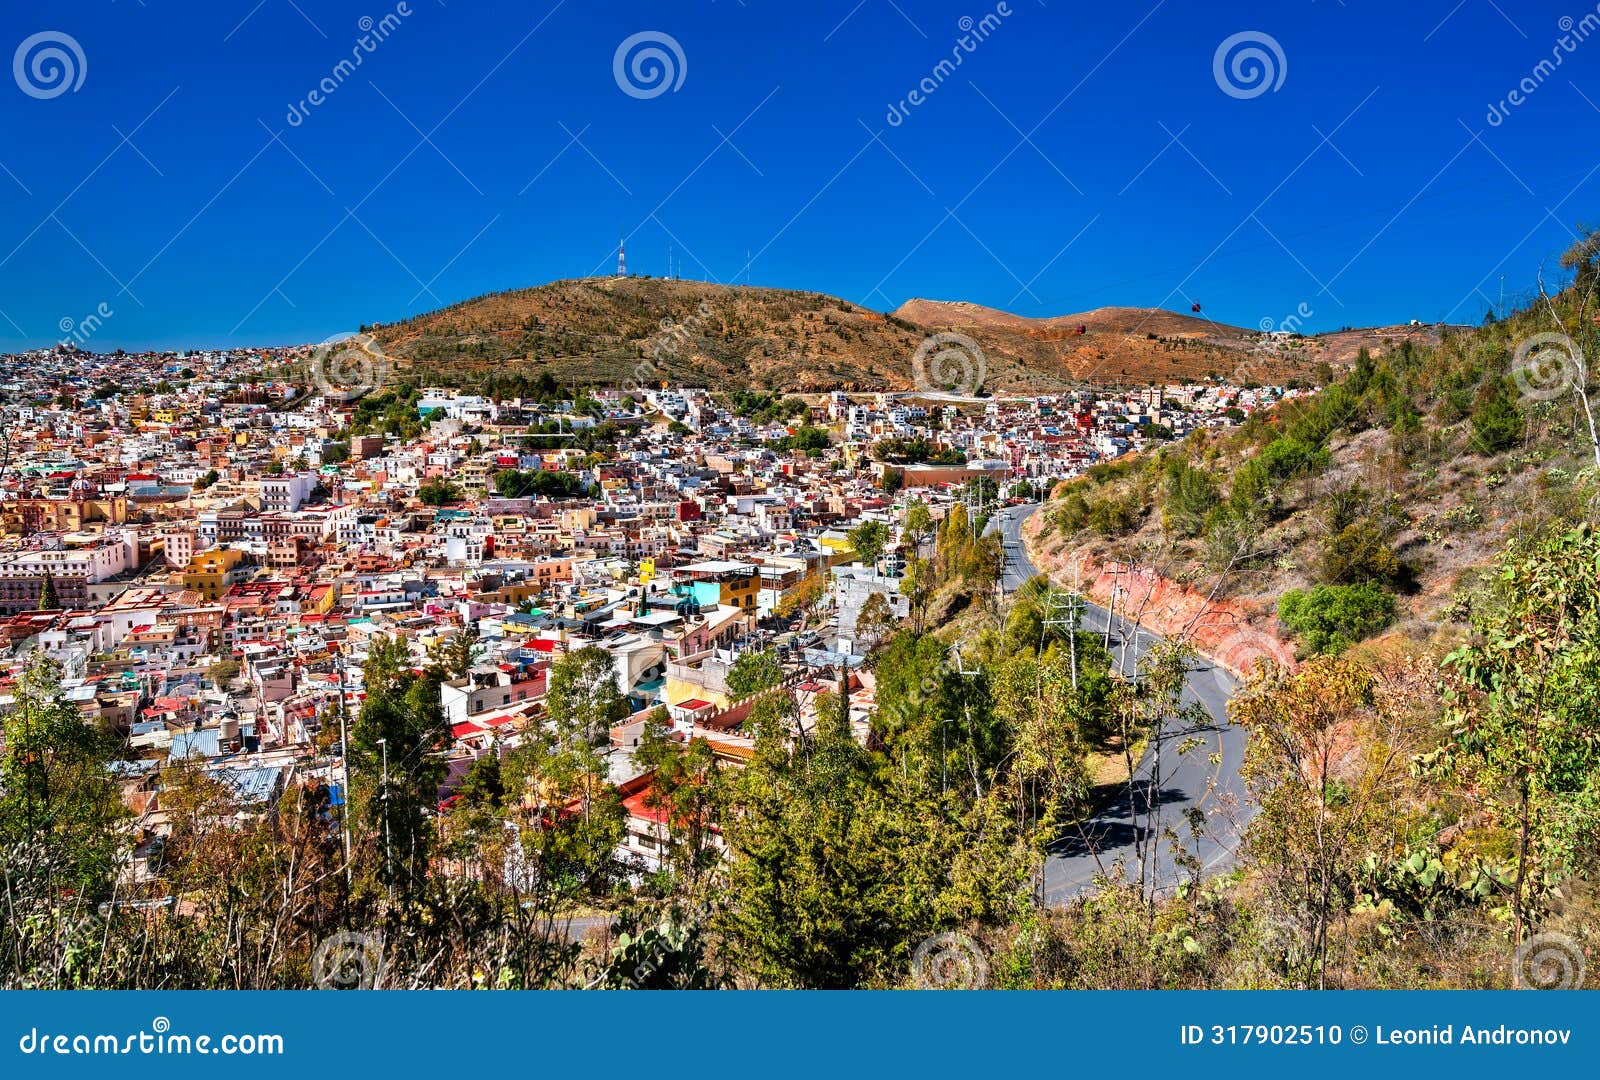 view of zacatecas from bufa hill in mexico